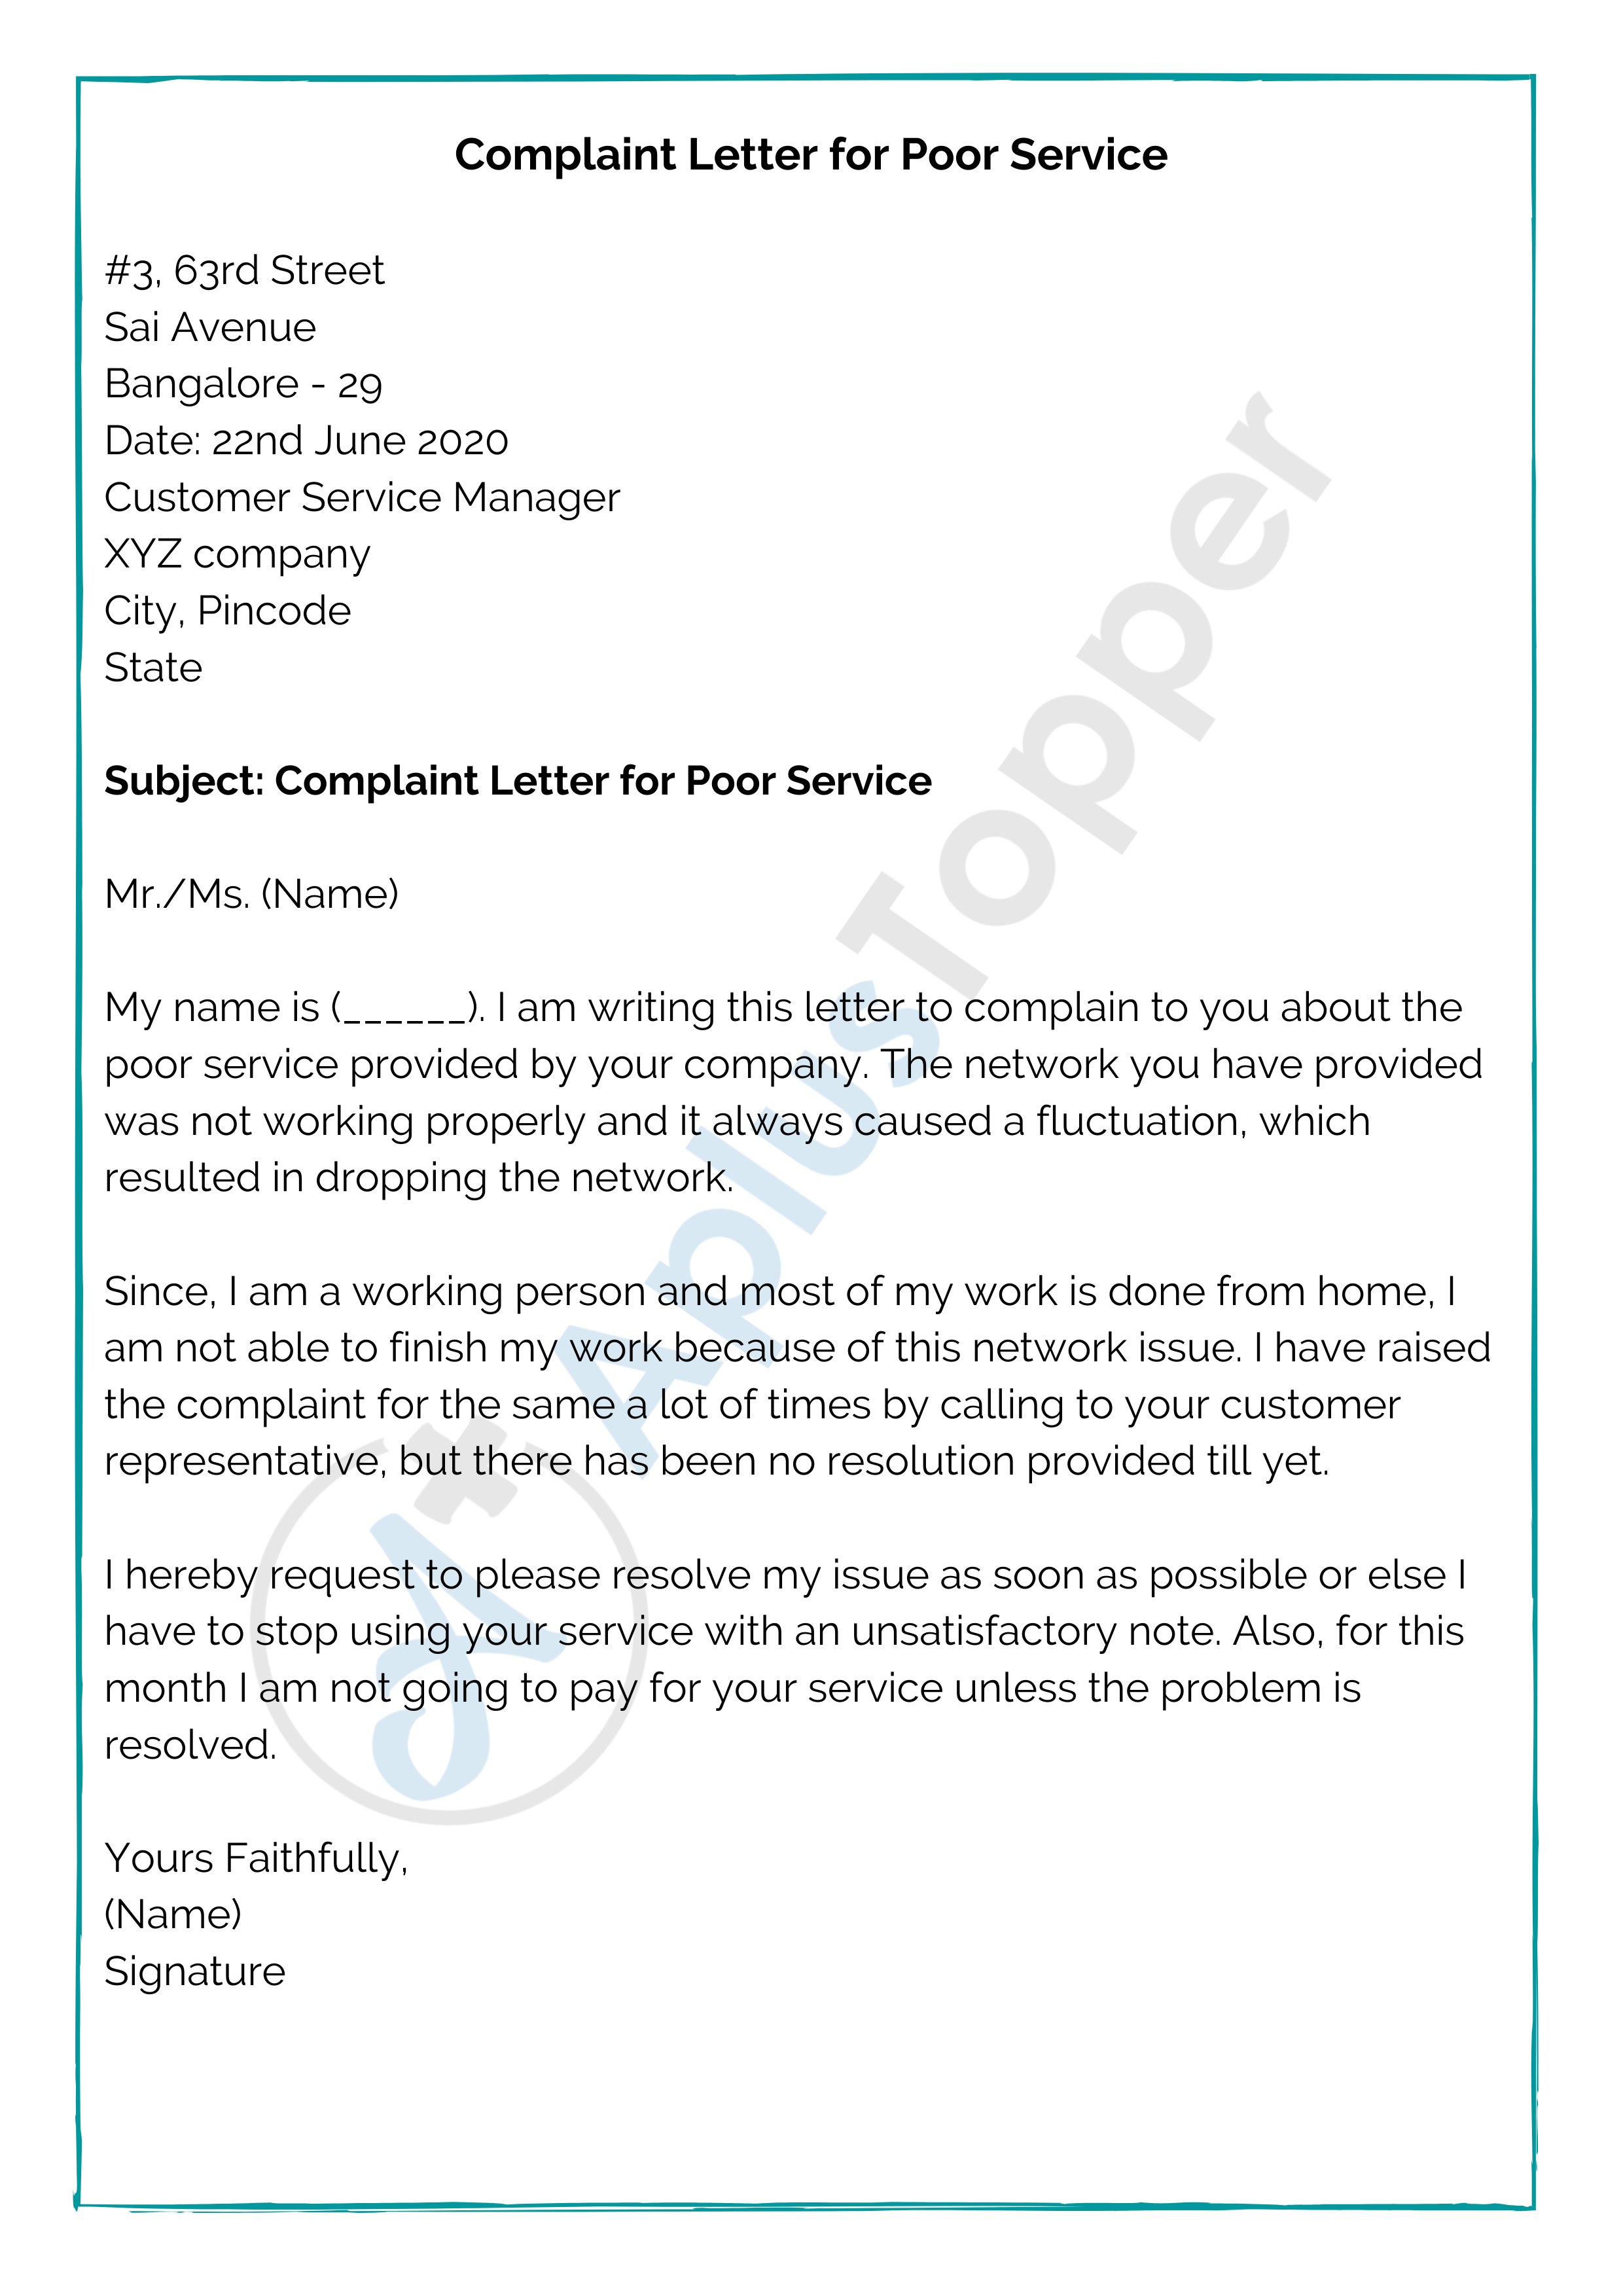 how to write application letter for complaint